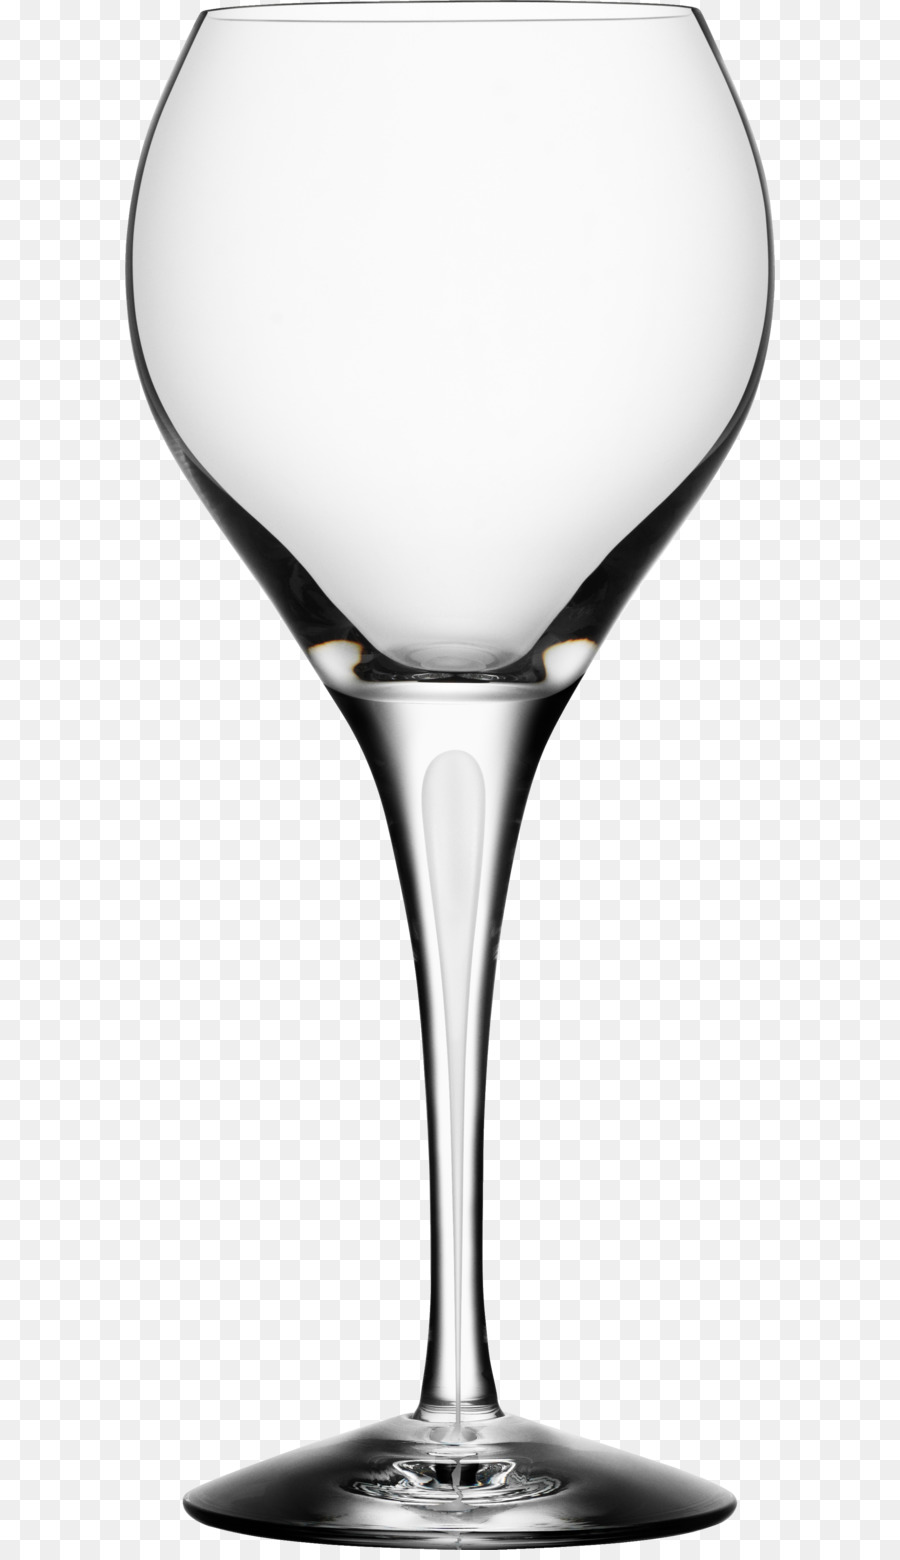 Wine glass Cocktail Champagne glass - Empty wine glass PNG image png download - 1701*4055 - Free Transparent Cocktail png Download.